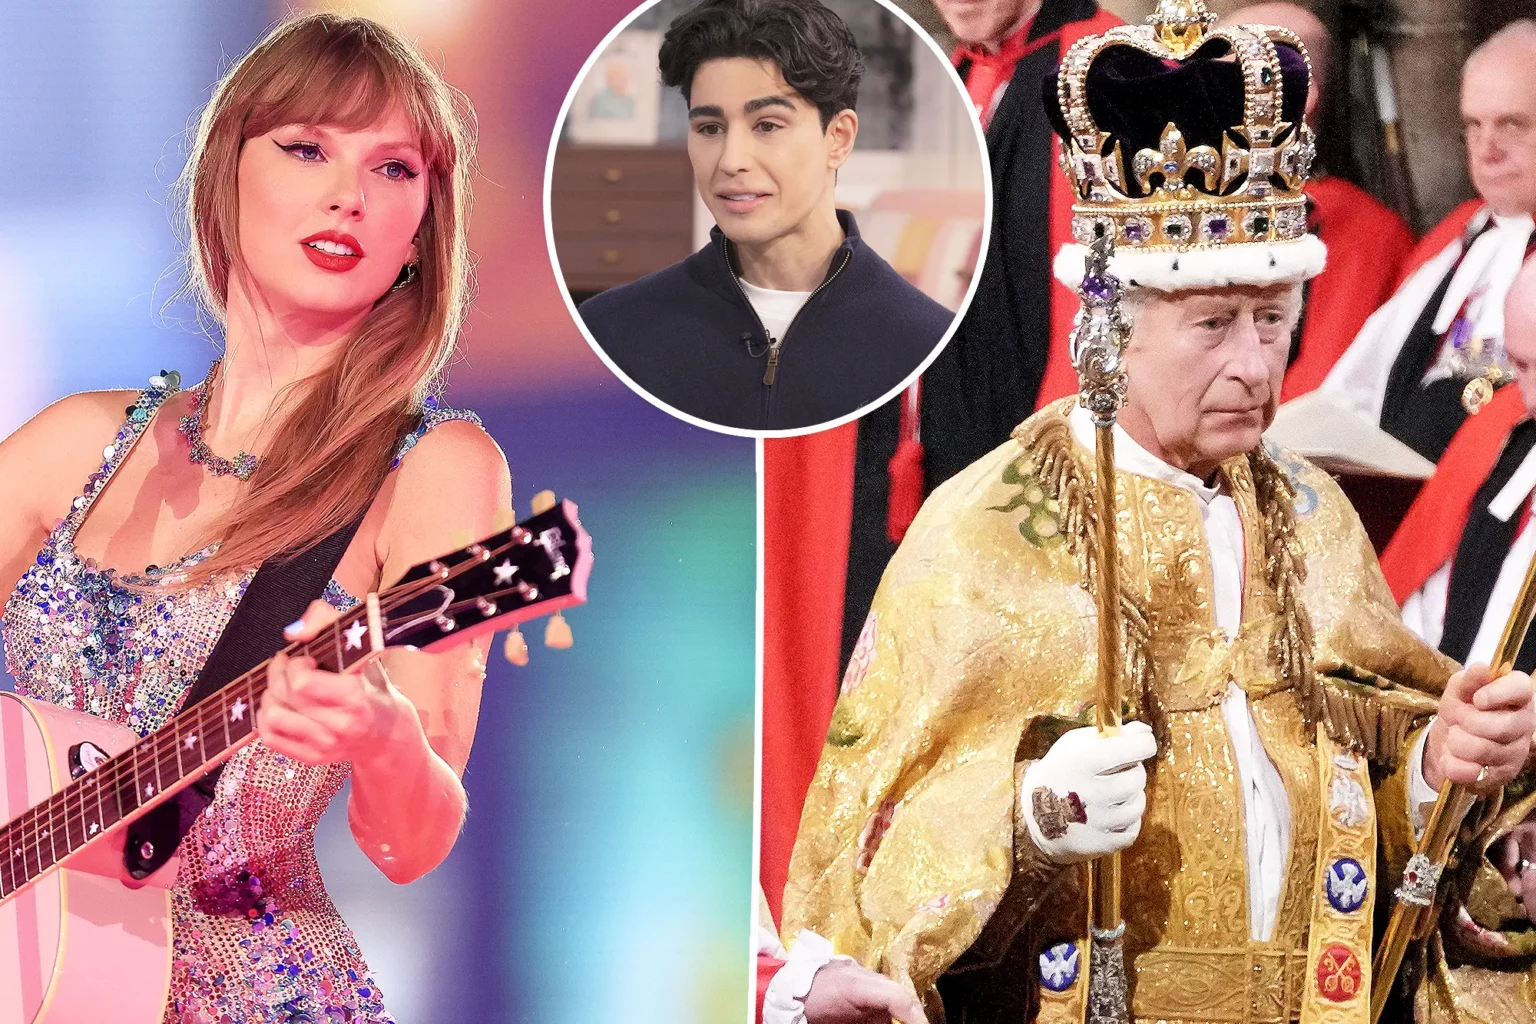 swifties-lash-out-at-omid-scobie-over-his-claims-that-taylor-swift-snubbed-king-charles